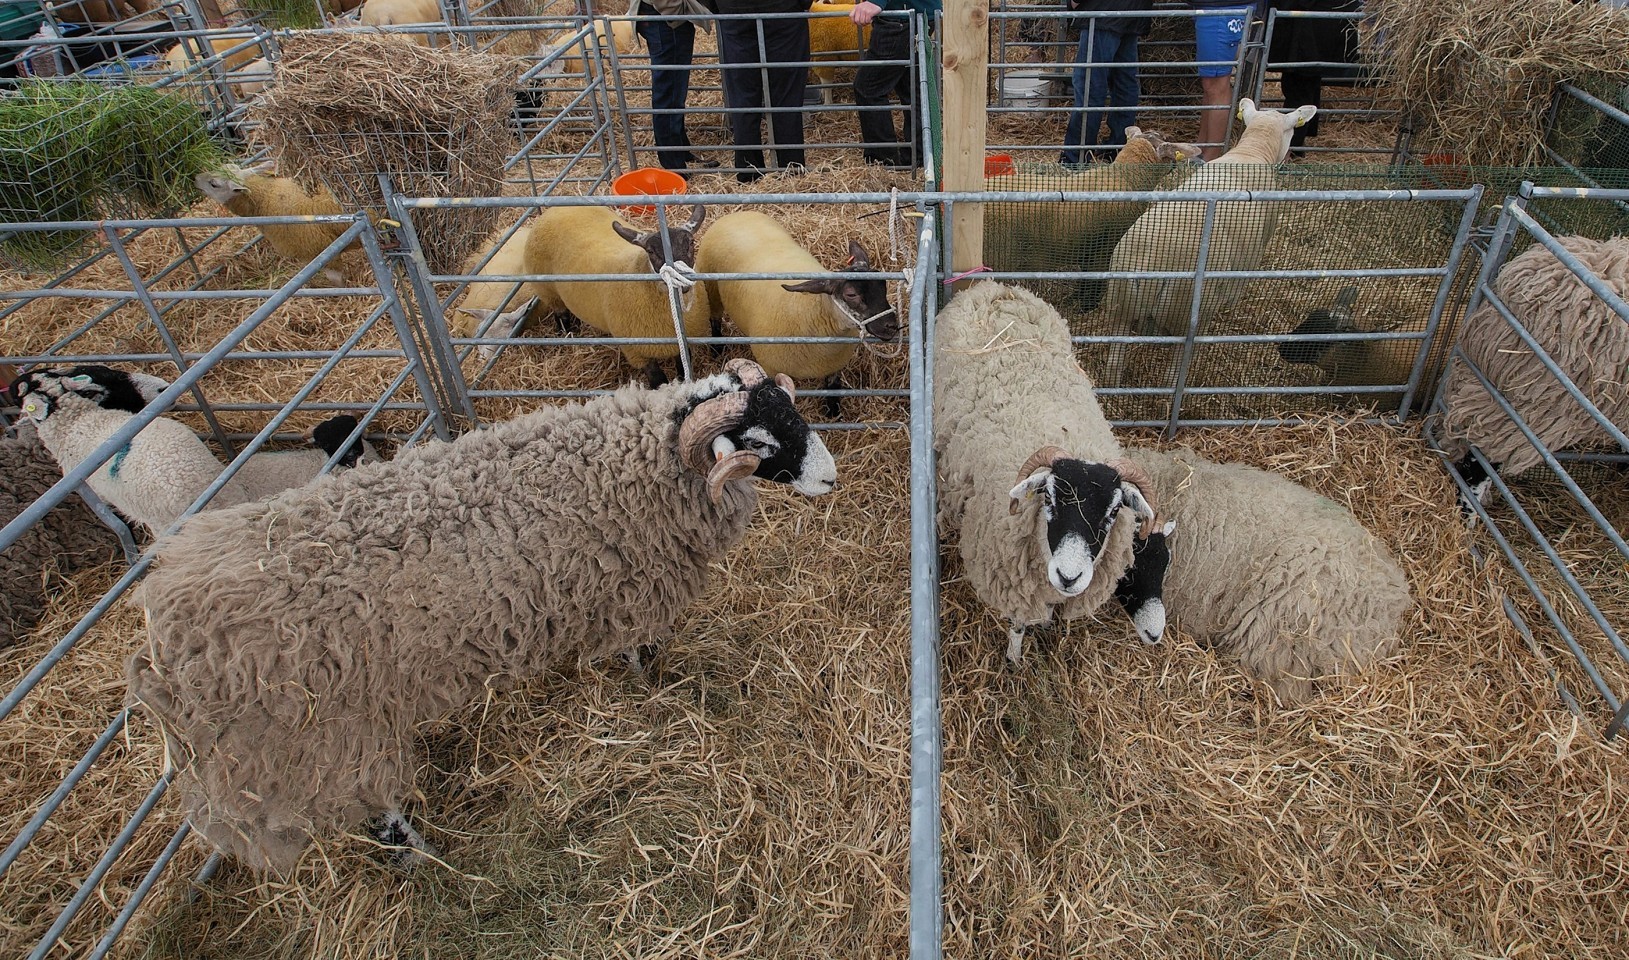 Sheep in their pens waiting on showtime